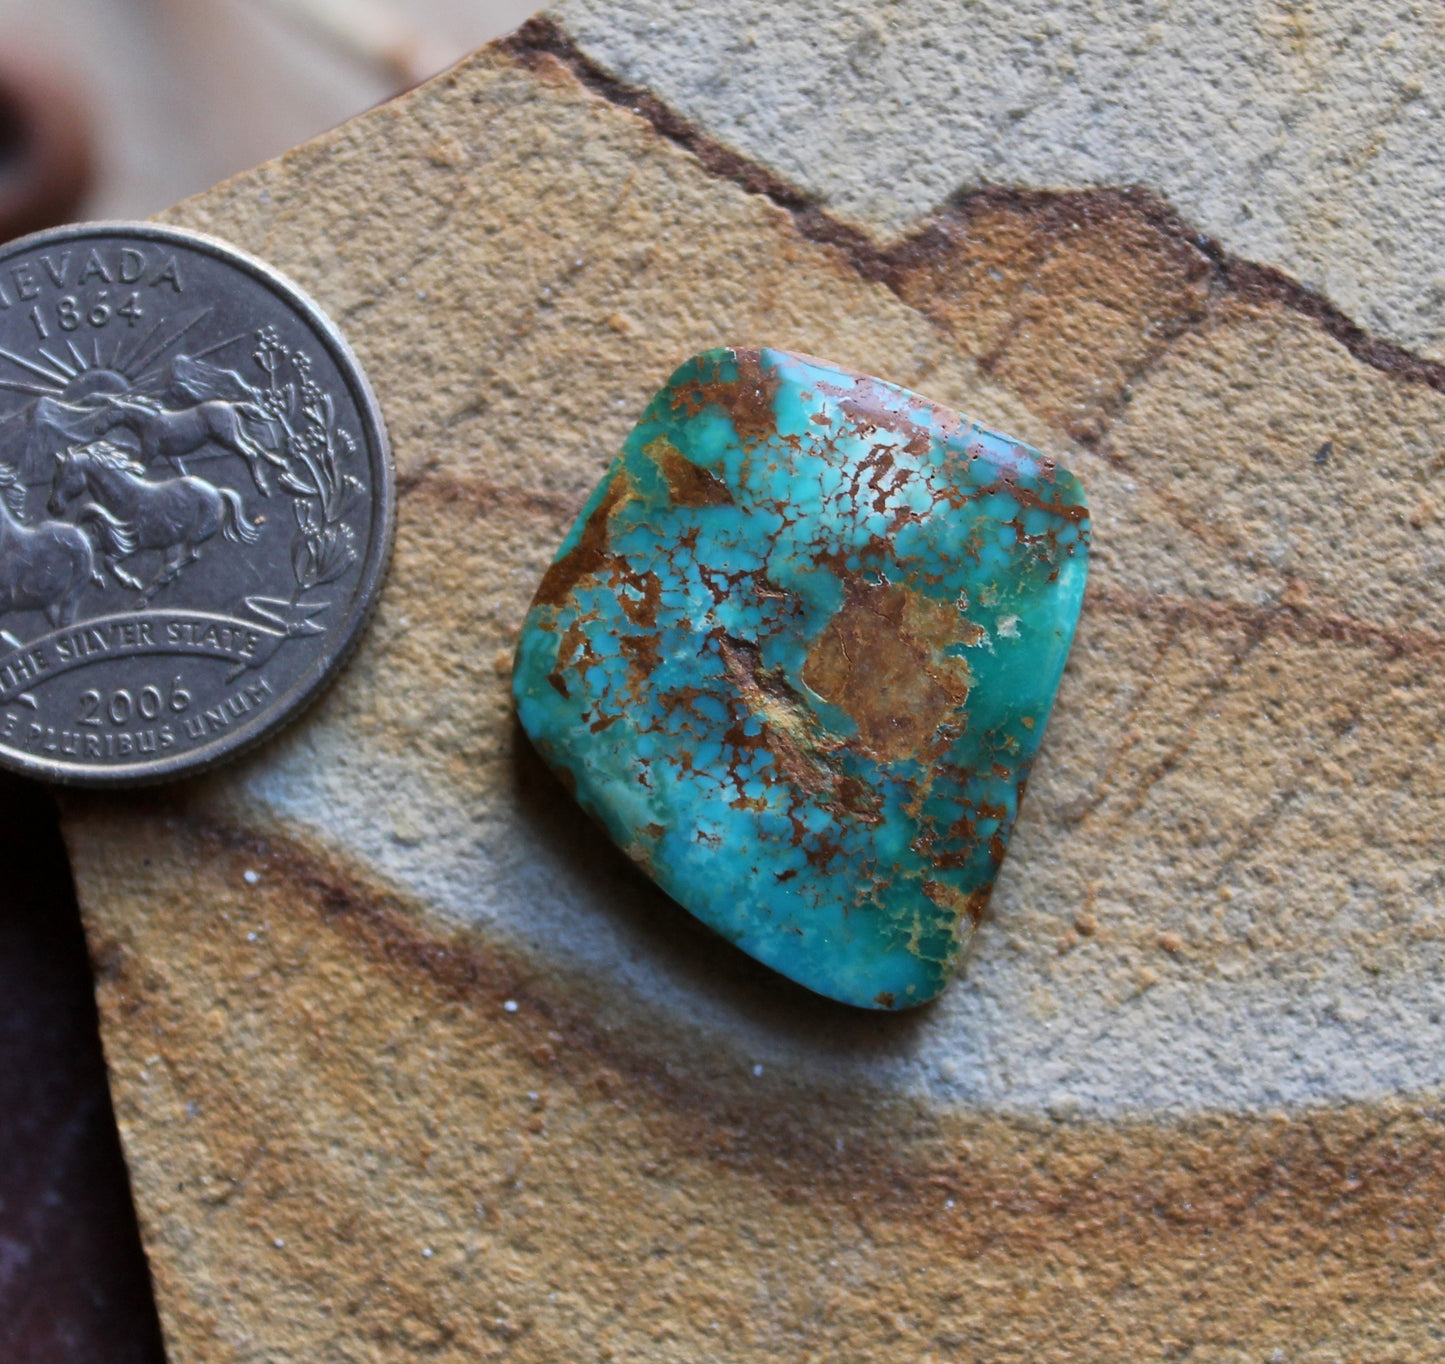 22 carat vivid blue Stone Mountain Turquoise cabochon with red matrix